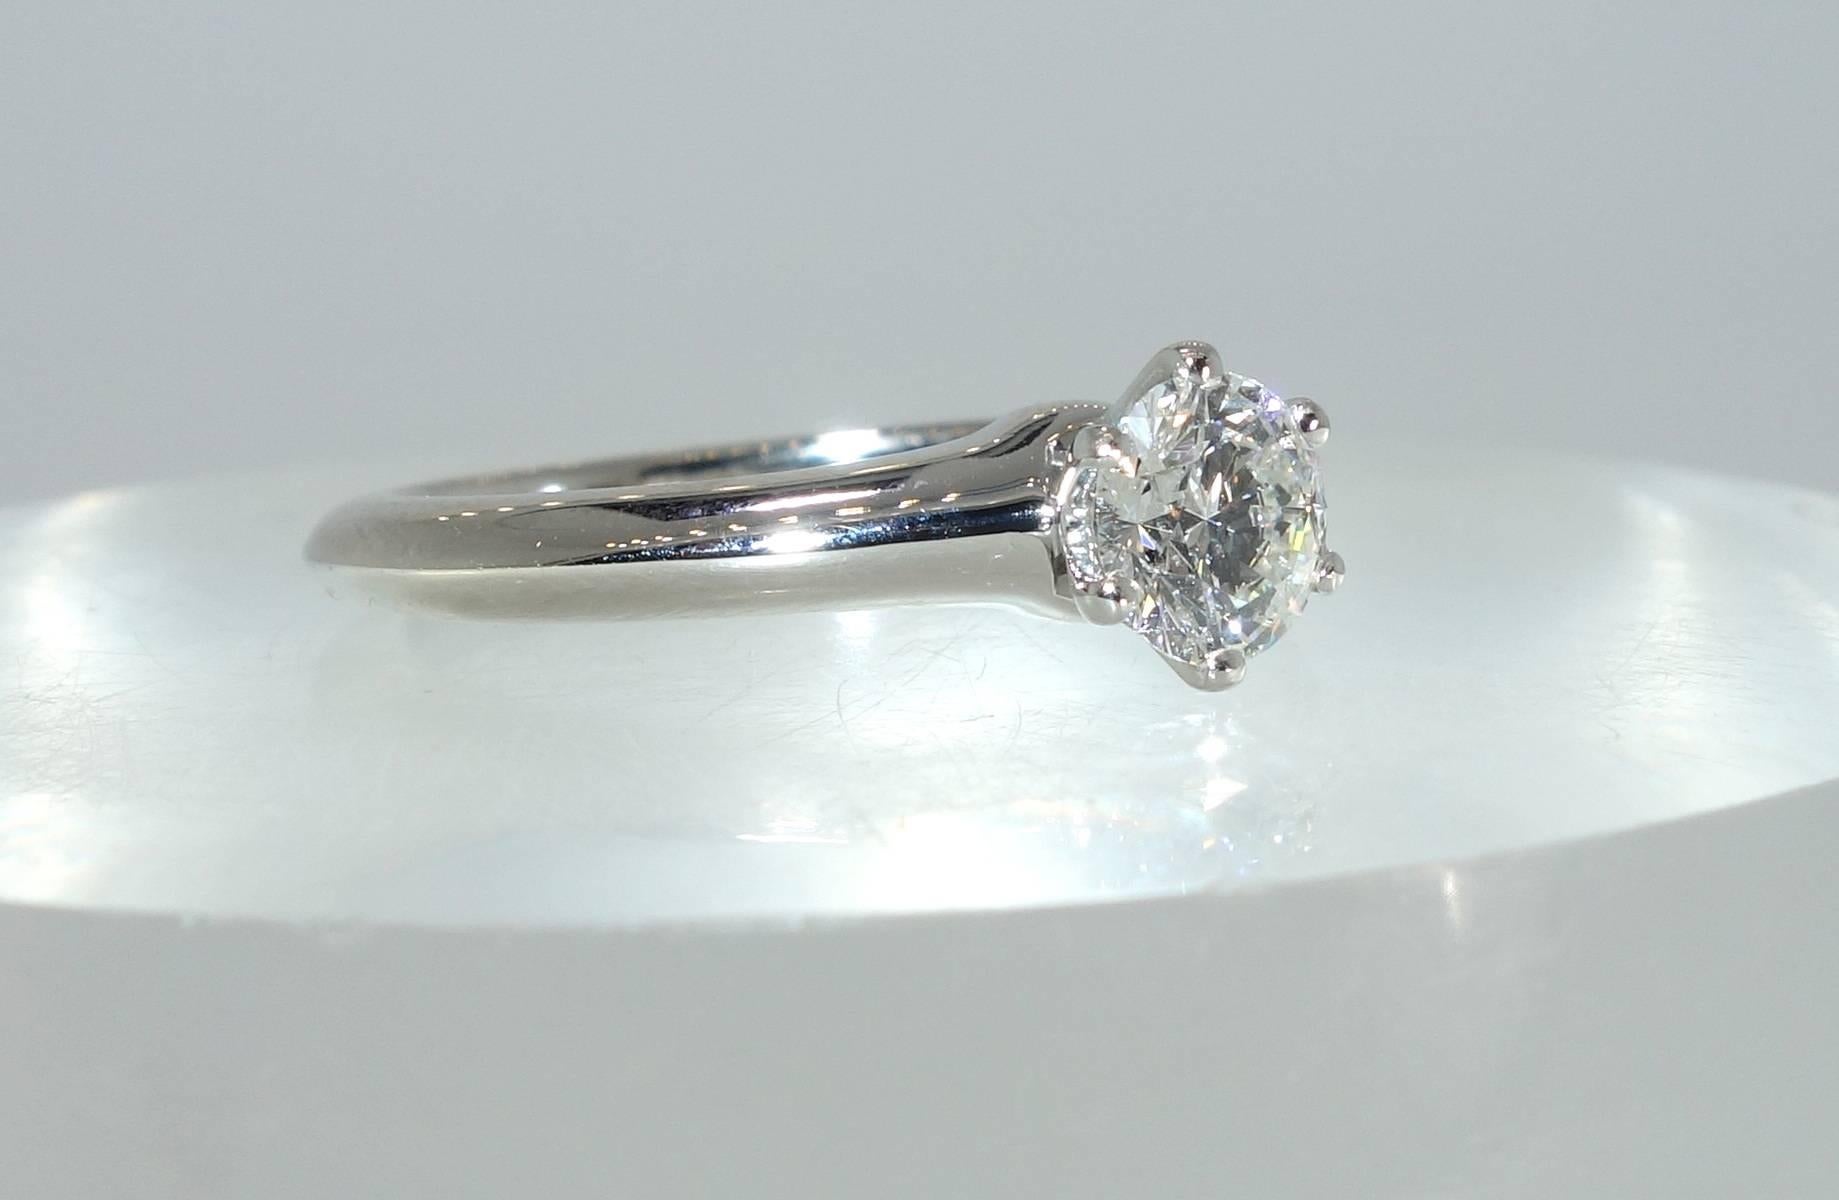 The center modern round brilliant cut diamond weighs .54 cts. and is near colorless (G), and VS (very slightly included).  This fine white diamond is prong set in a fine platinum mounting by Tiffany & Co.